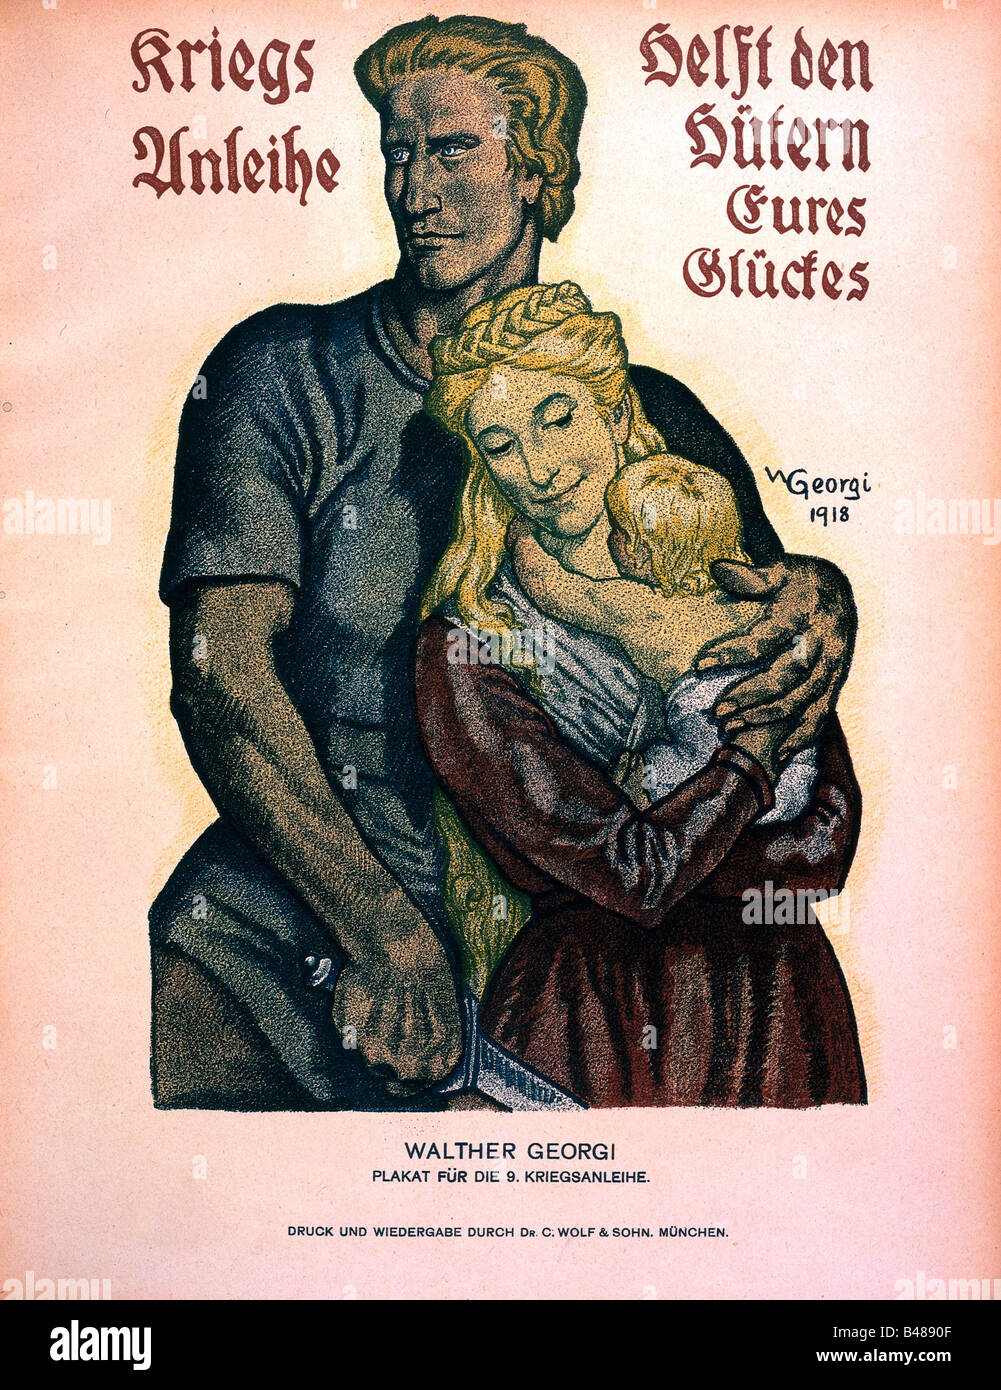 events, First World War / WWI, propaganda, poster 'Helft den Huetern Eures Glueckes' (War bond - Help the keepers of your happyness), by Walther Georgi, Germany, 1918, Stock Photo